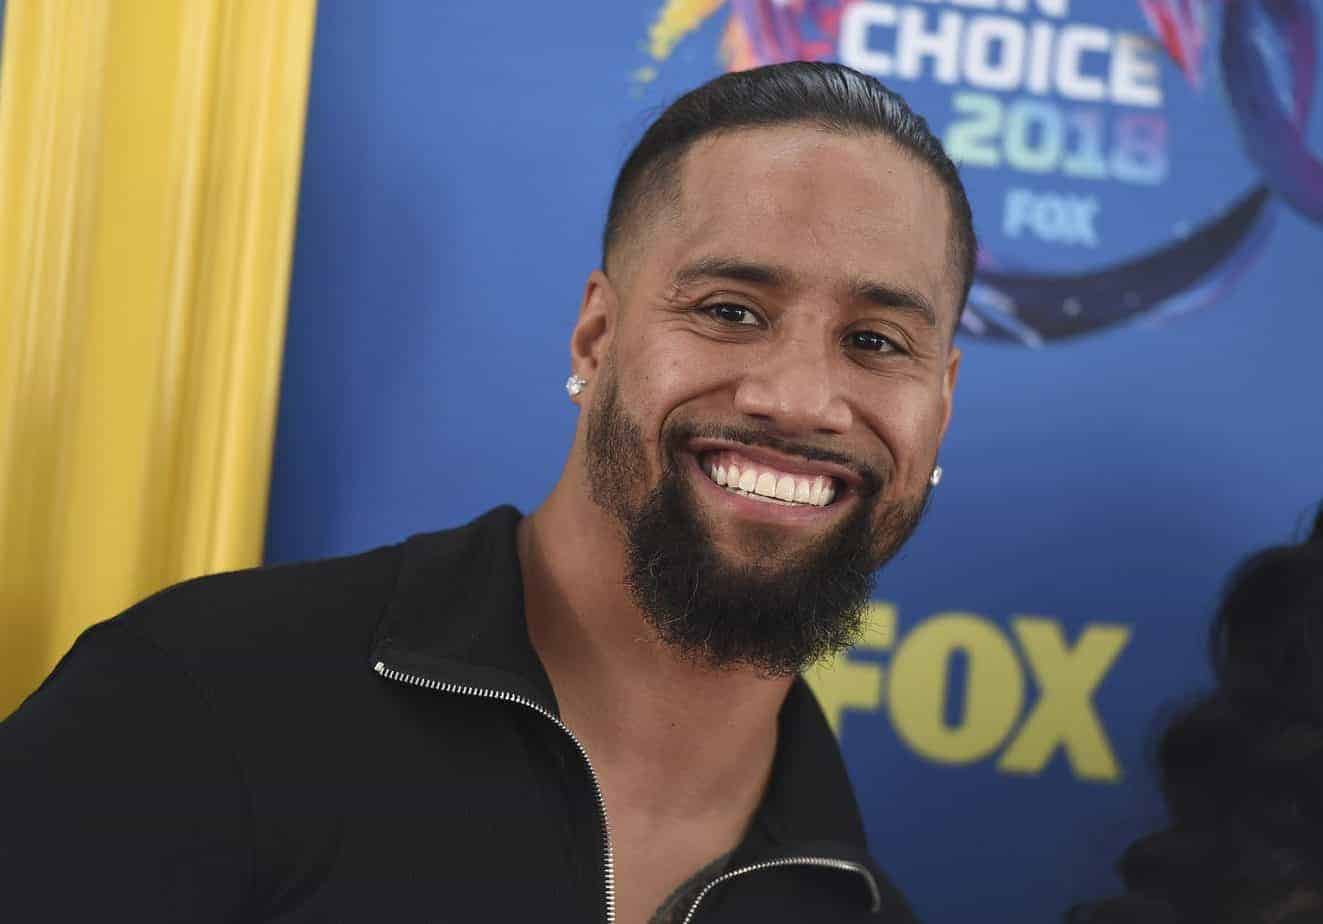 Fans flocked to social media on Tuesday morning to share their reactions to WWE star Jimmy Uso blowing a .205 during another DUI